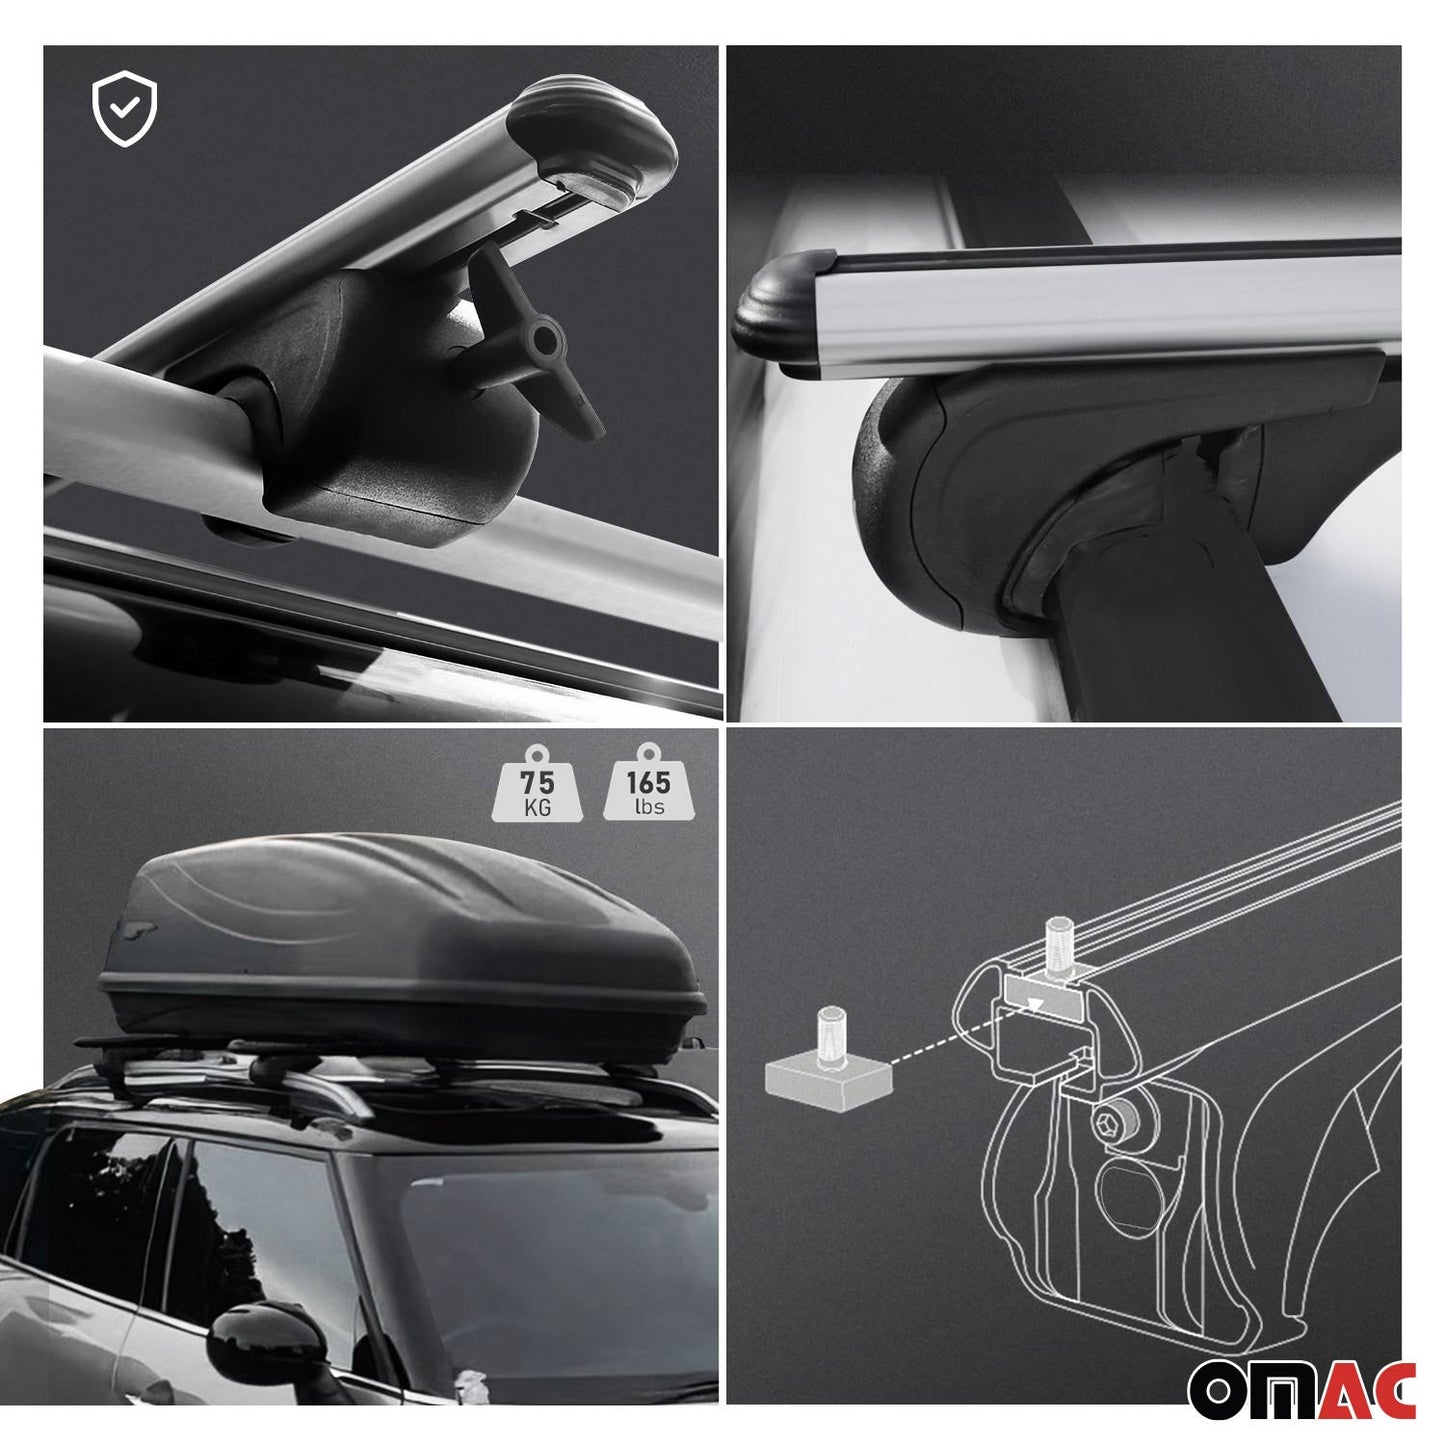 OMAC Lockable Roof Rack Cross Bars Luggage Carrier for Dodge Journey 2009-2020 Gray 25289696929L